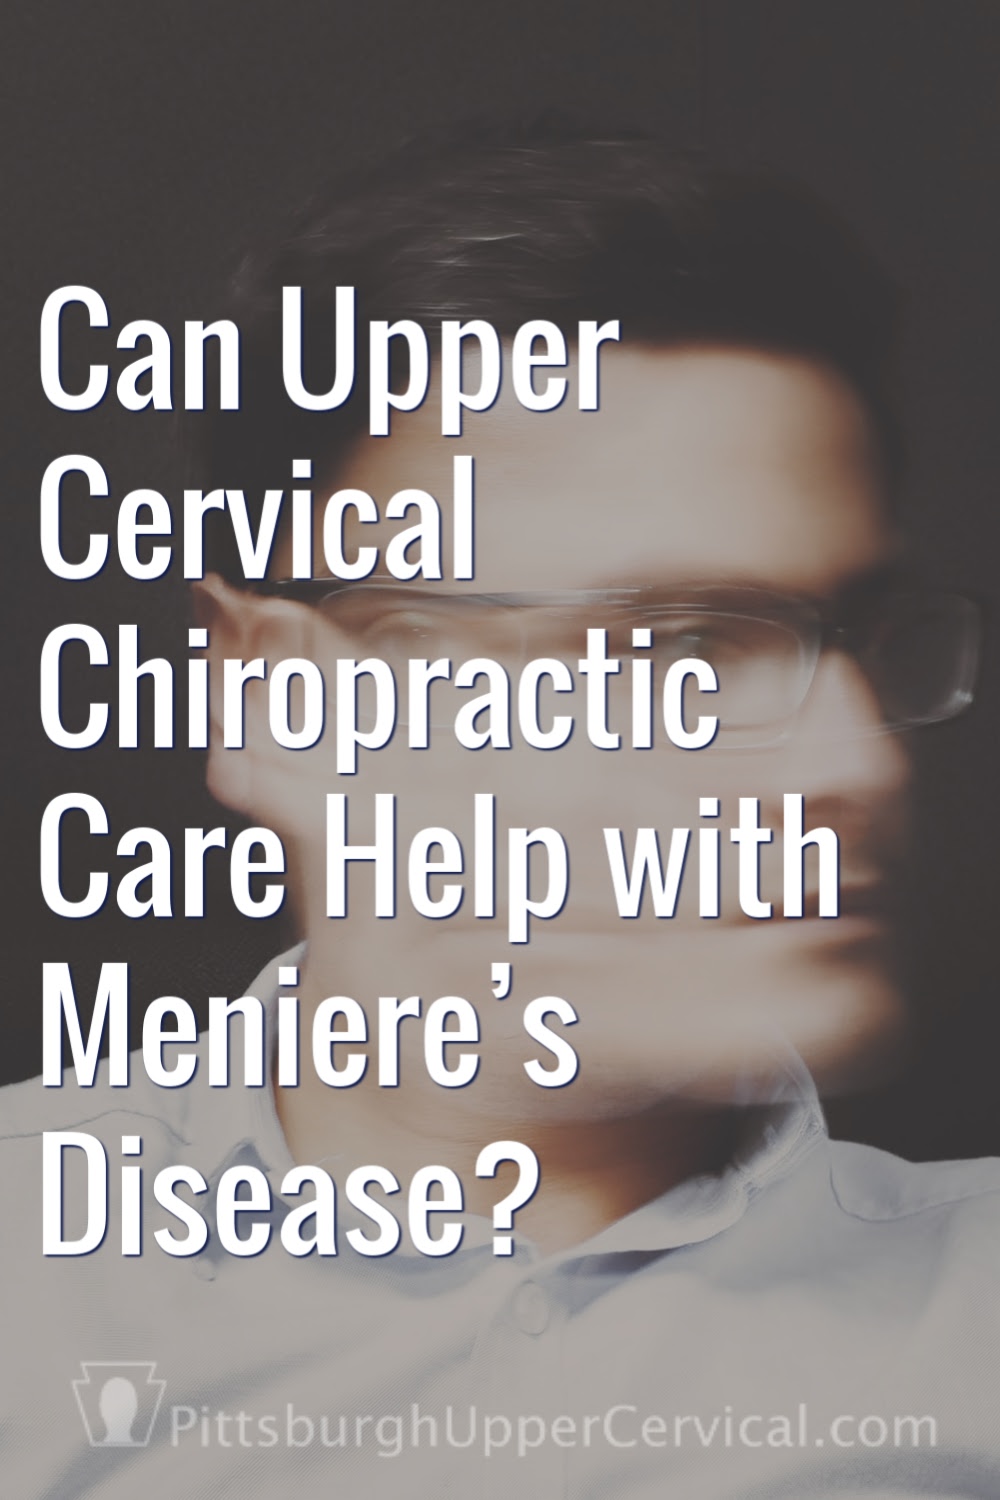 Can Upper Cervical Chiropractic Care Help with Meniere’s Disease